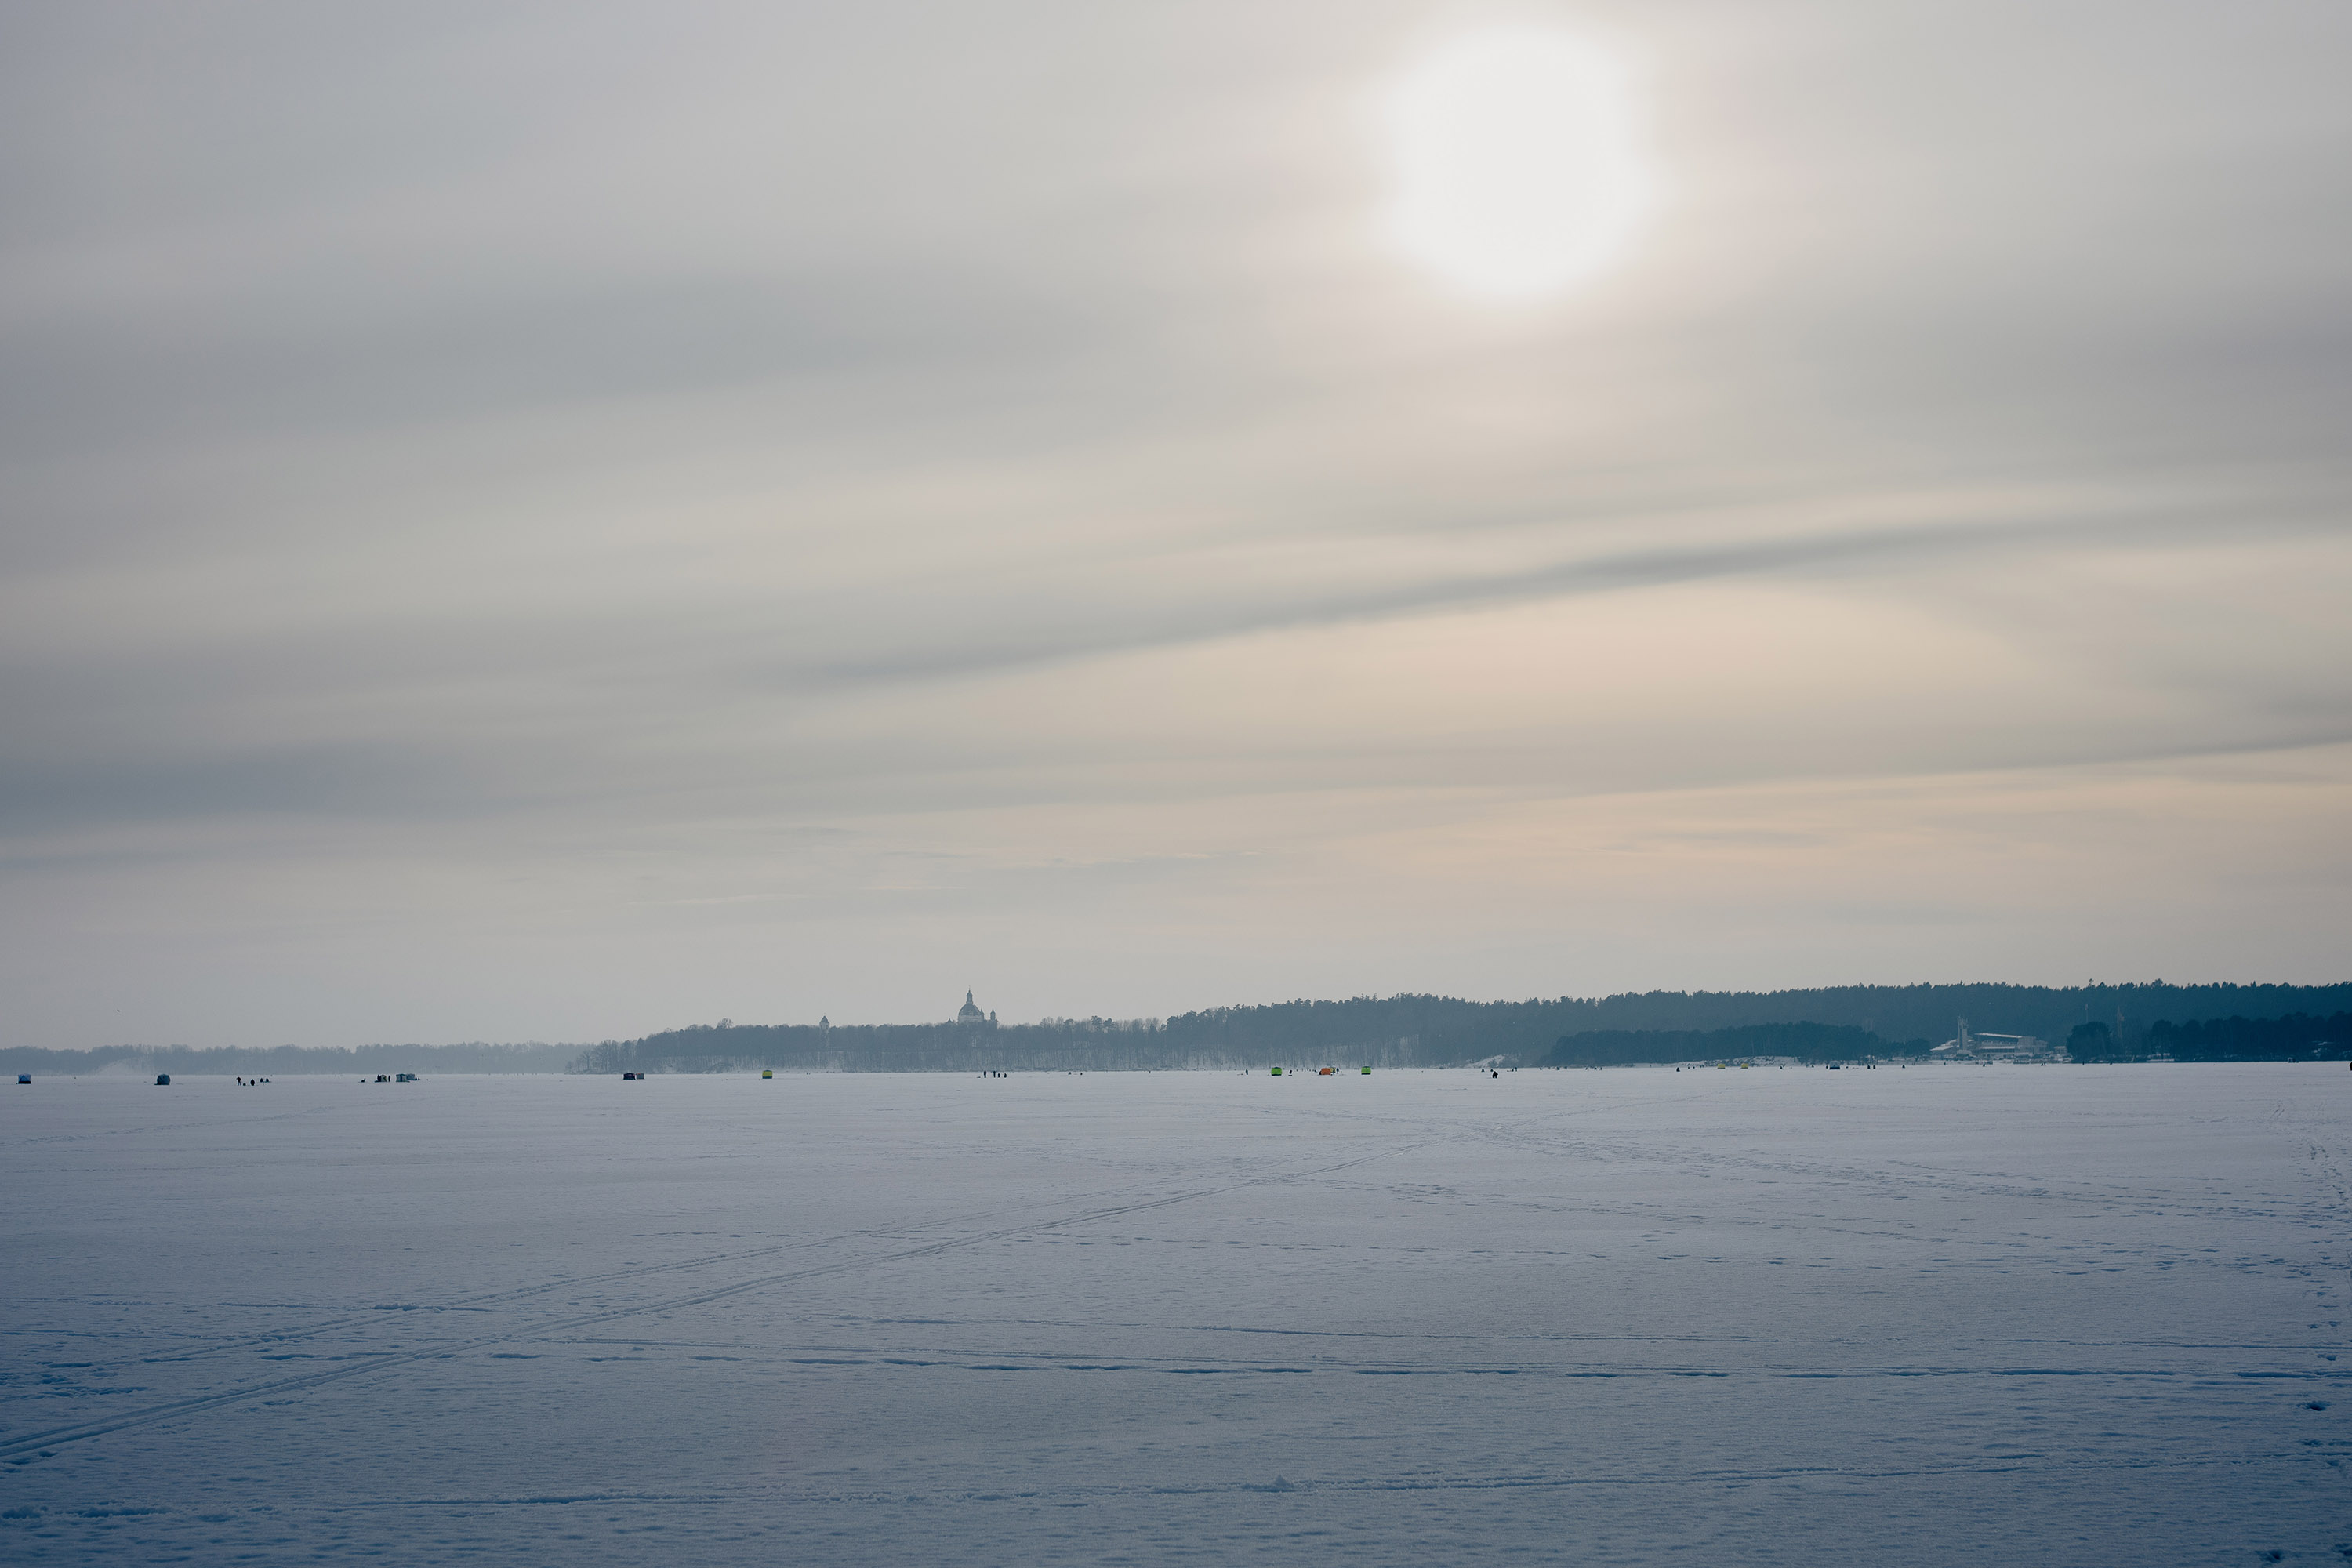 Kaunas lagoon is completely frozen over during winter - Contarex 50mm f2